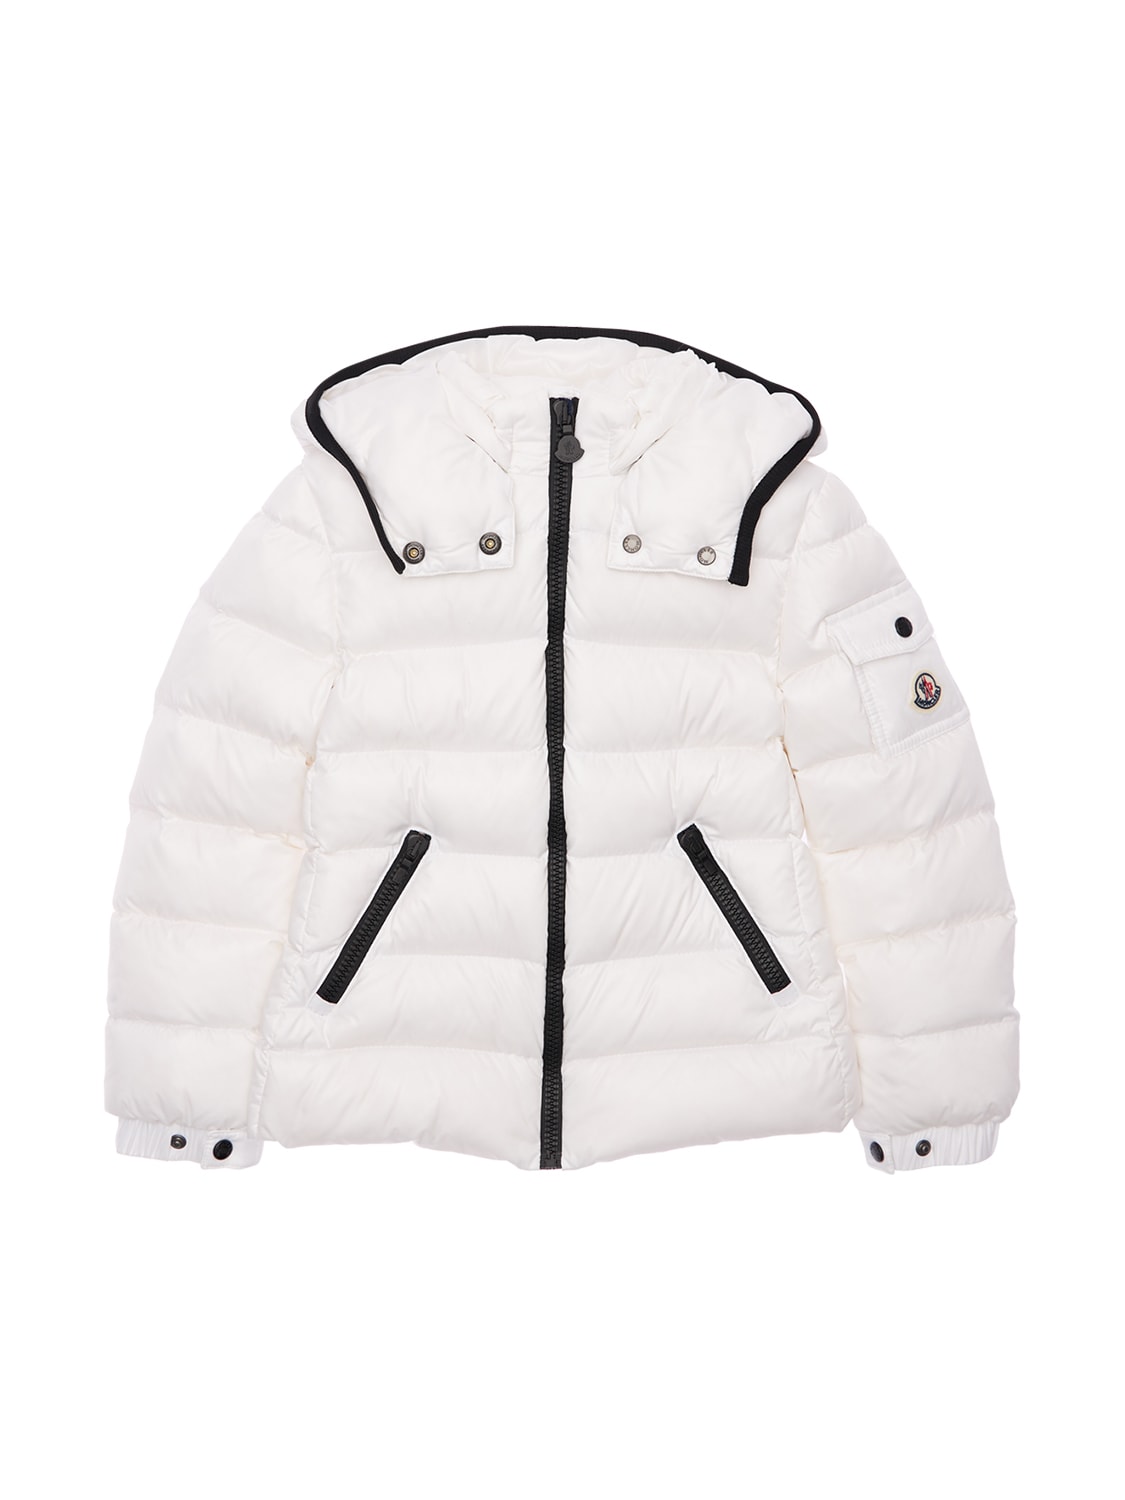 MONCLER BADY HOODED NYLON DOWN JACKET,74IFGT045-MDMY0